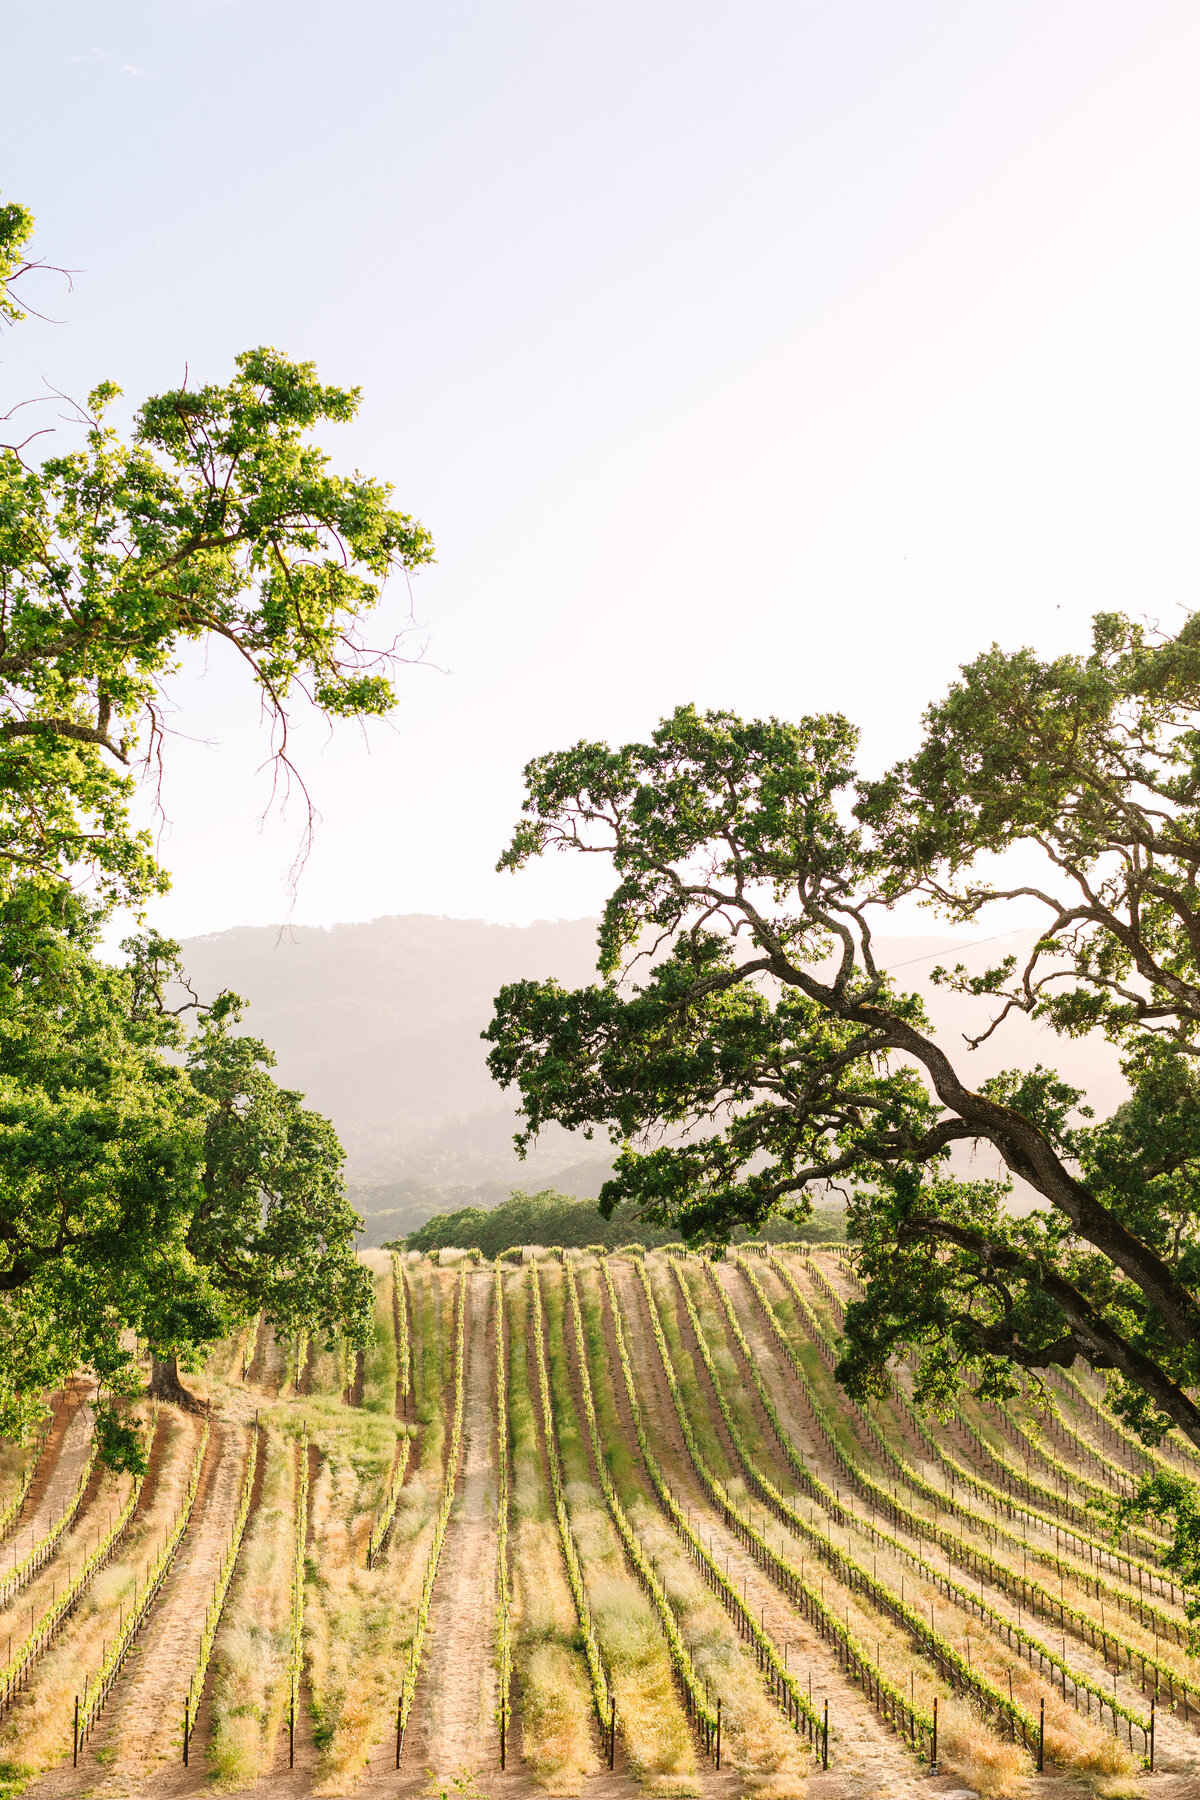 sonoma county vineyard with large oak trees and mountains in background.